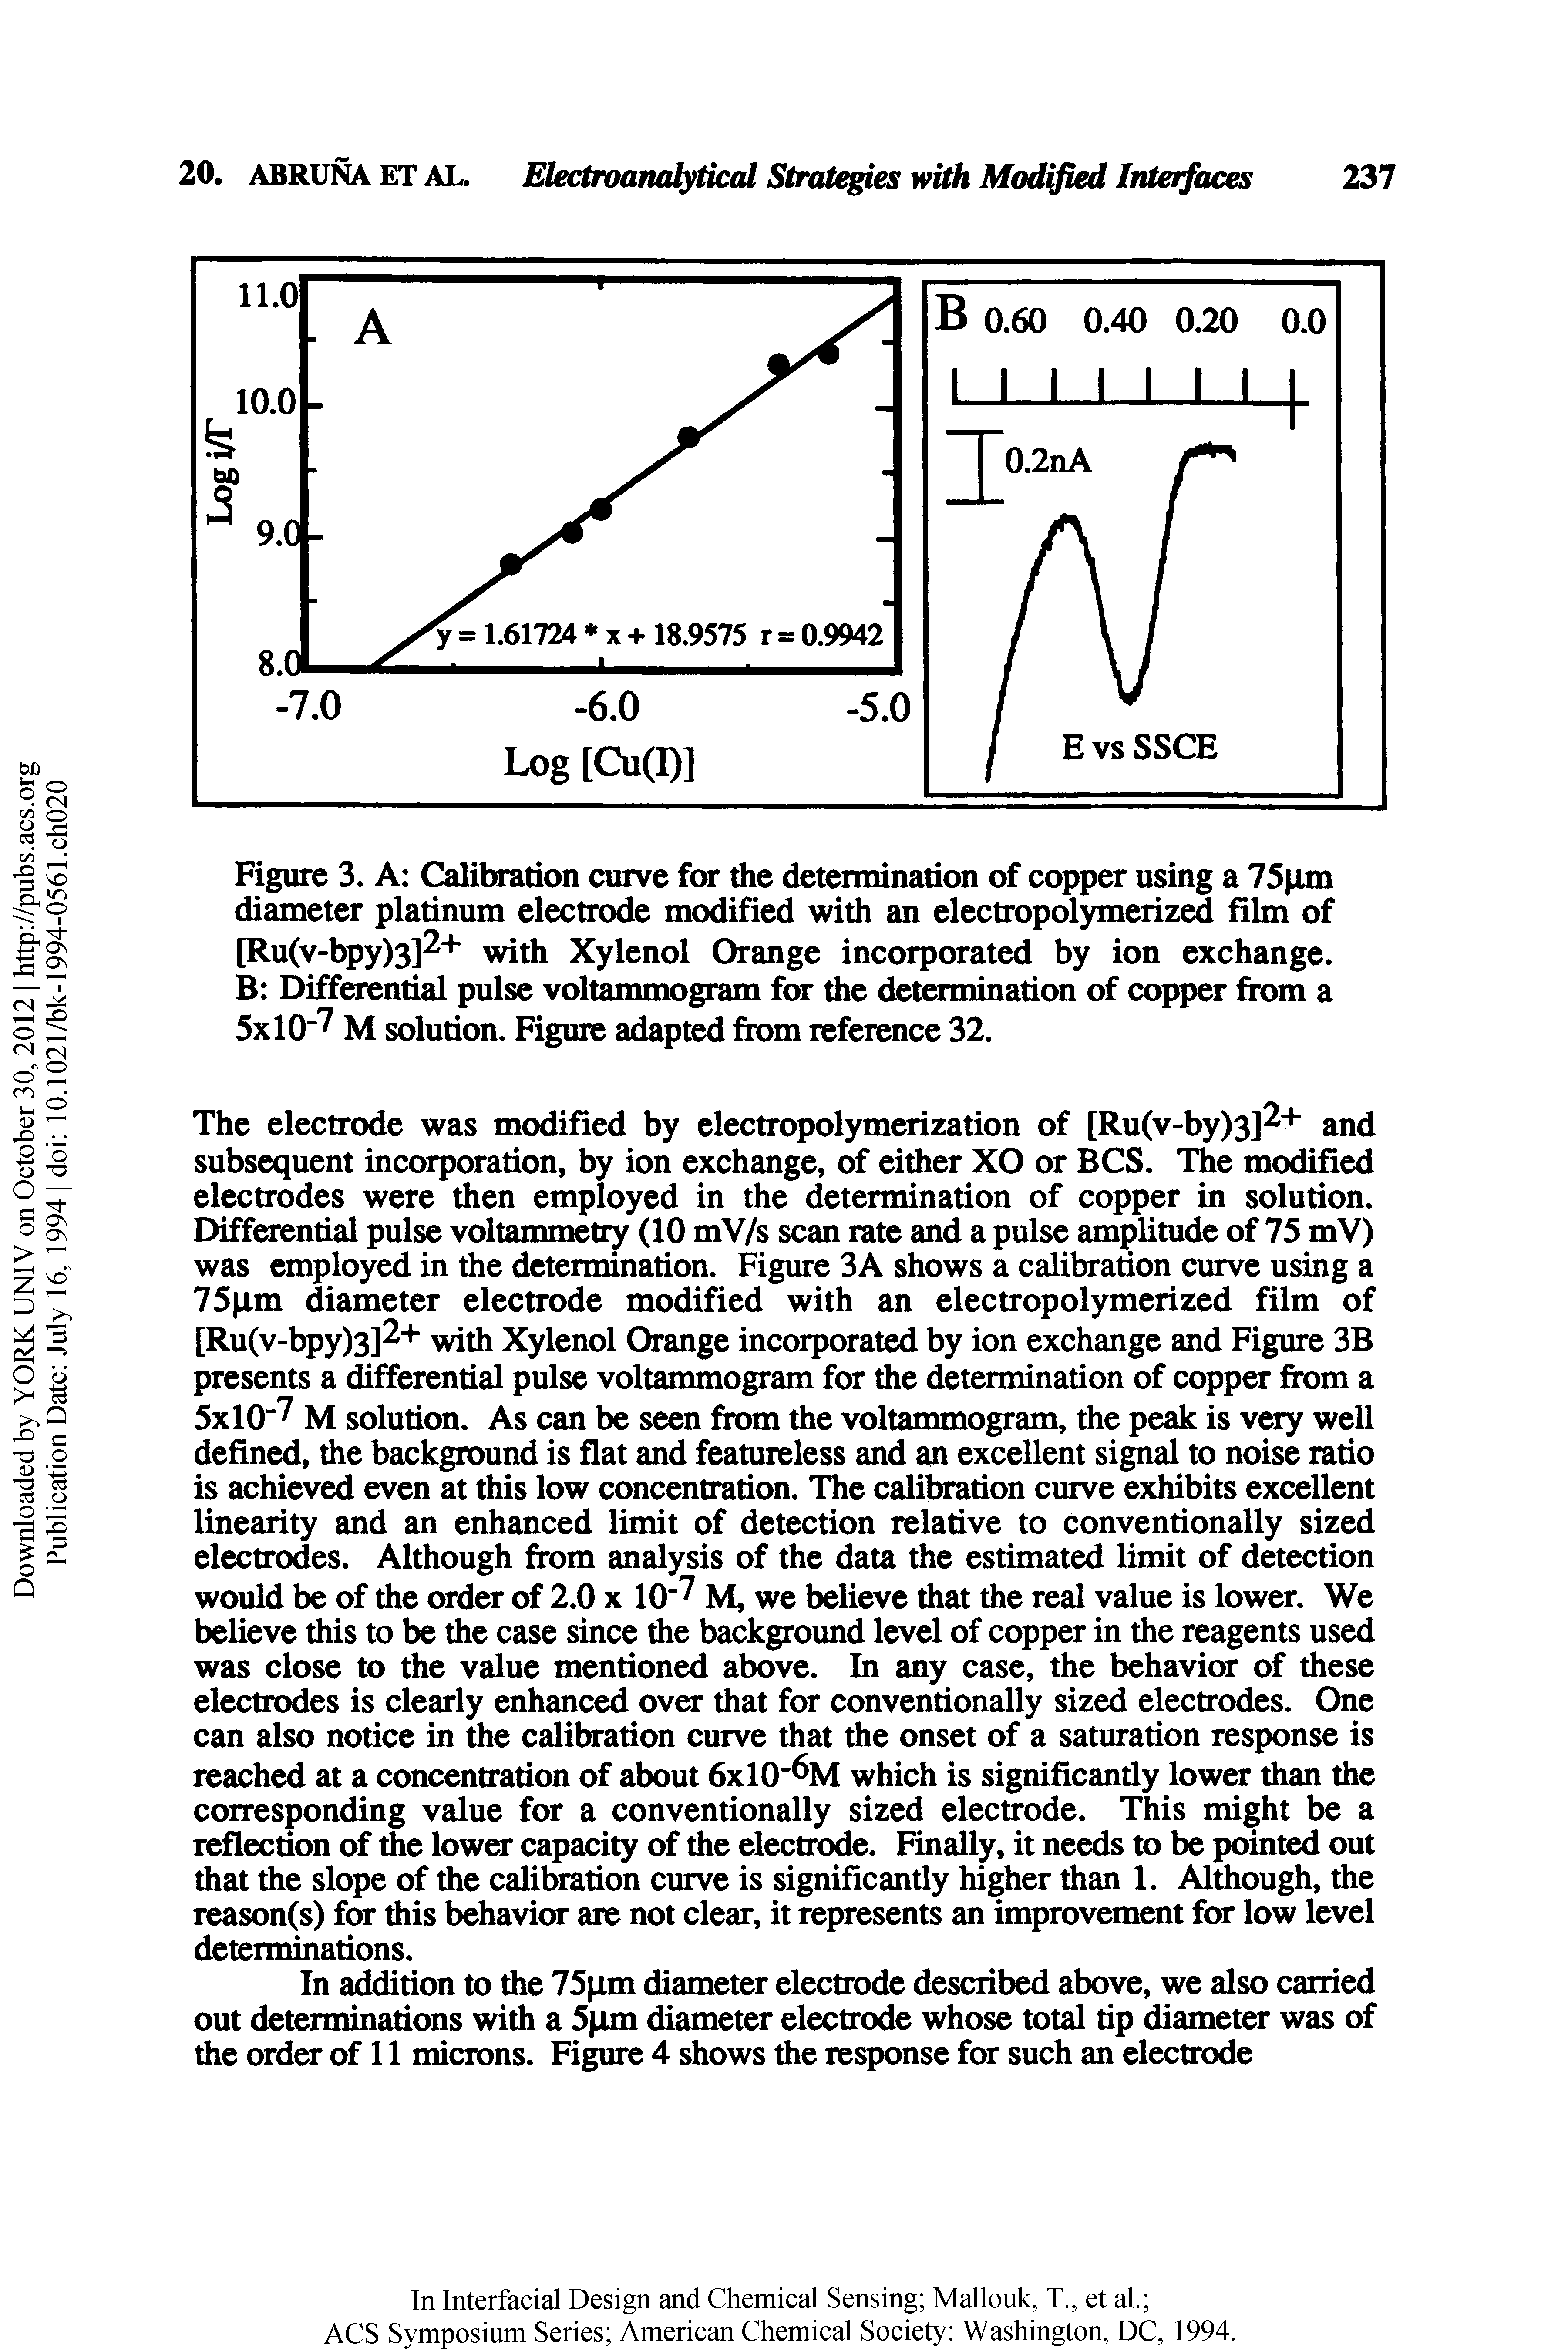 Figure 3. A Calibration curve for the determination of copper using a 75pm diameter platinum electrode modified with an electropolymerized film of [Ru(v-bpy)3] + with Xylenol Orange incorporated by ion exchange B Differential pulse voltammogram for the determination of copper from a 5x10" M solution. Figure adapted from reference 32.